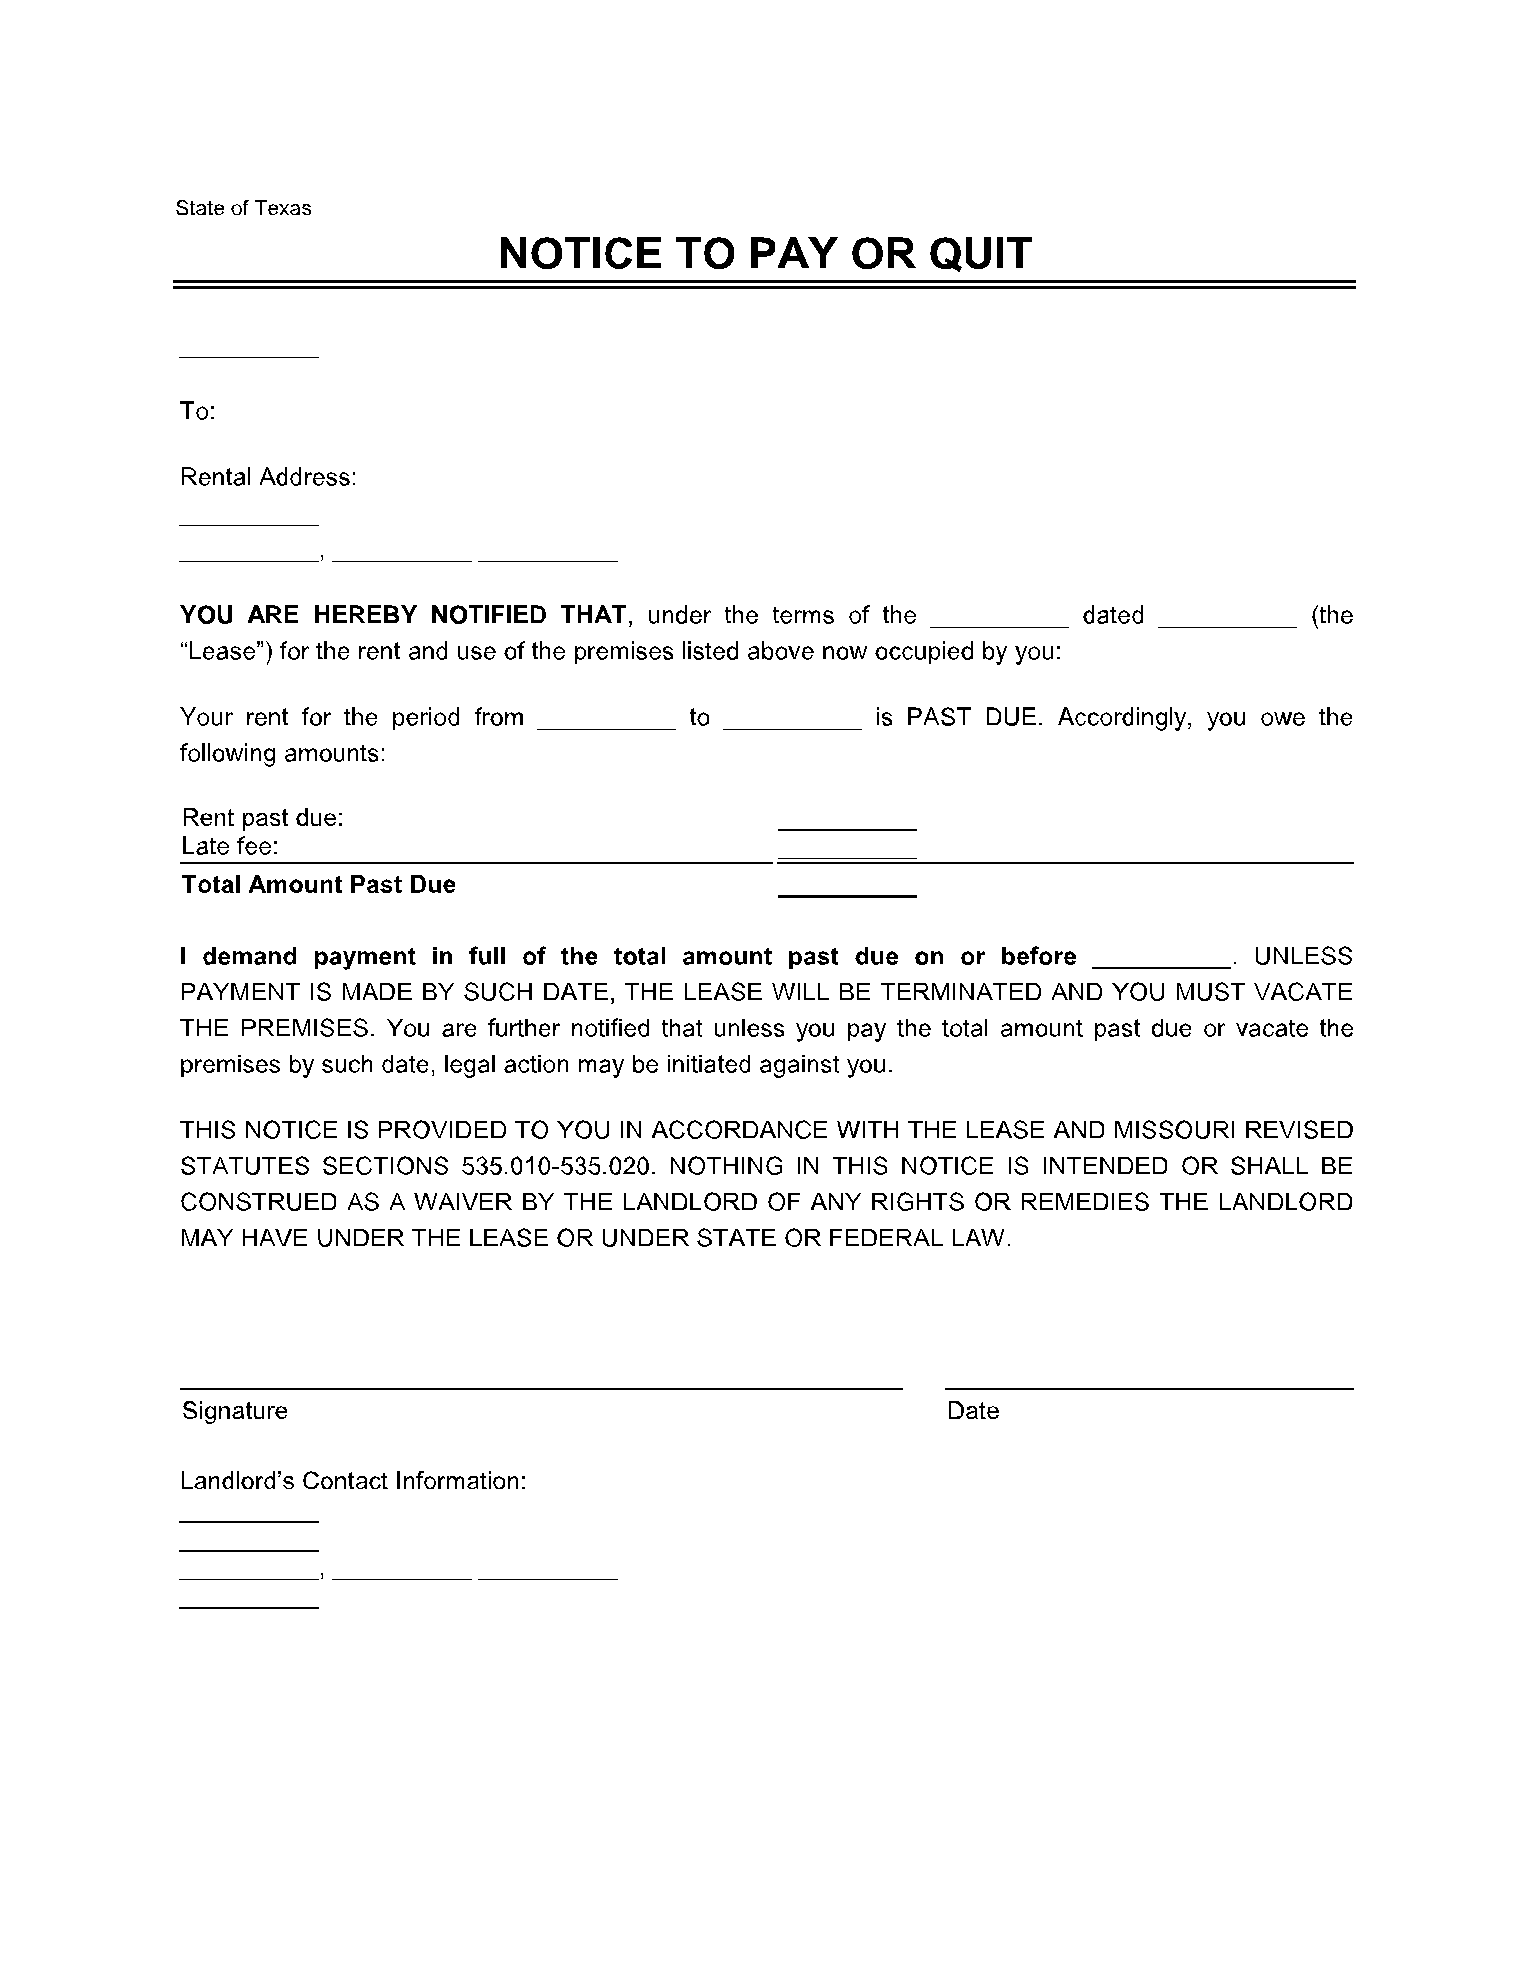 Texas 3 Day Eviction Notice Forms